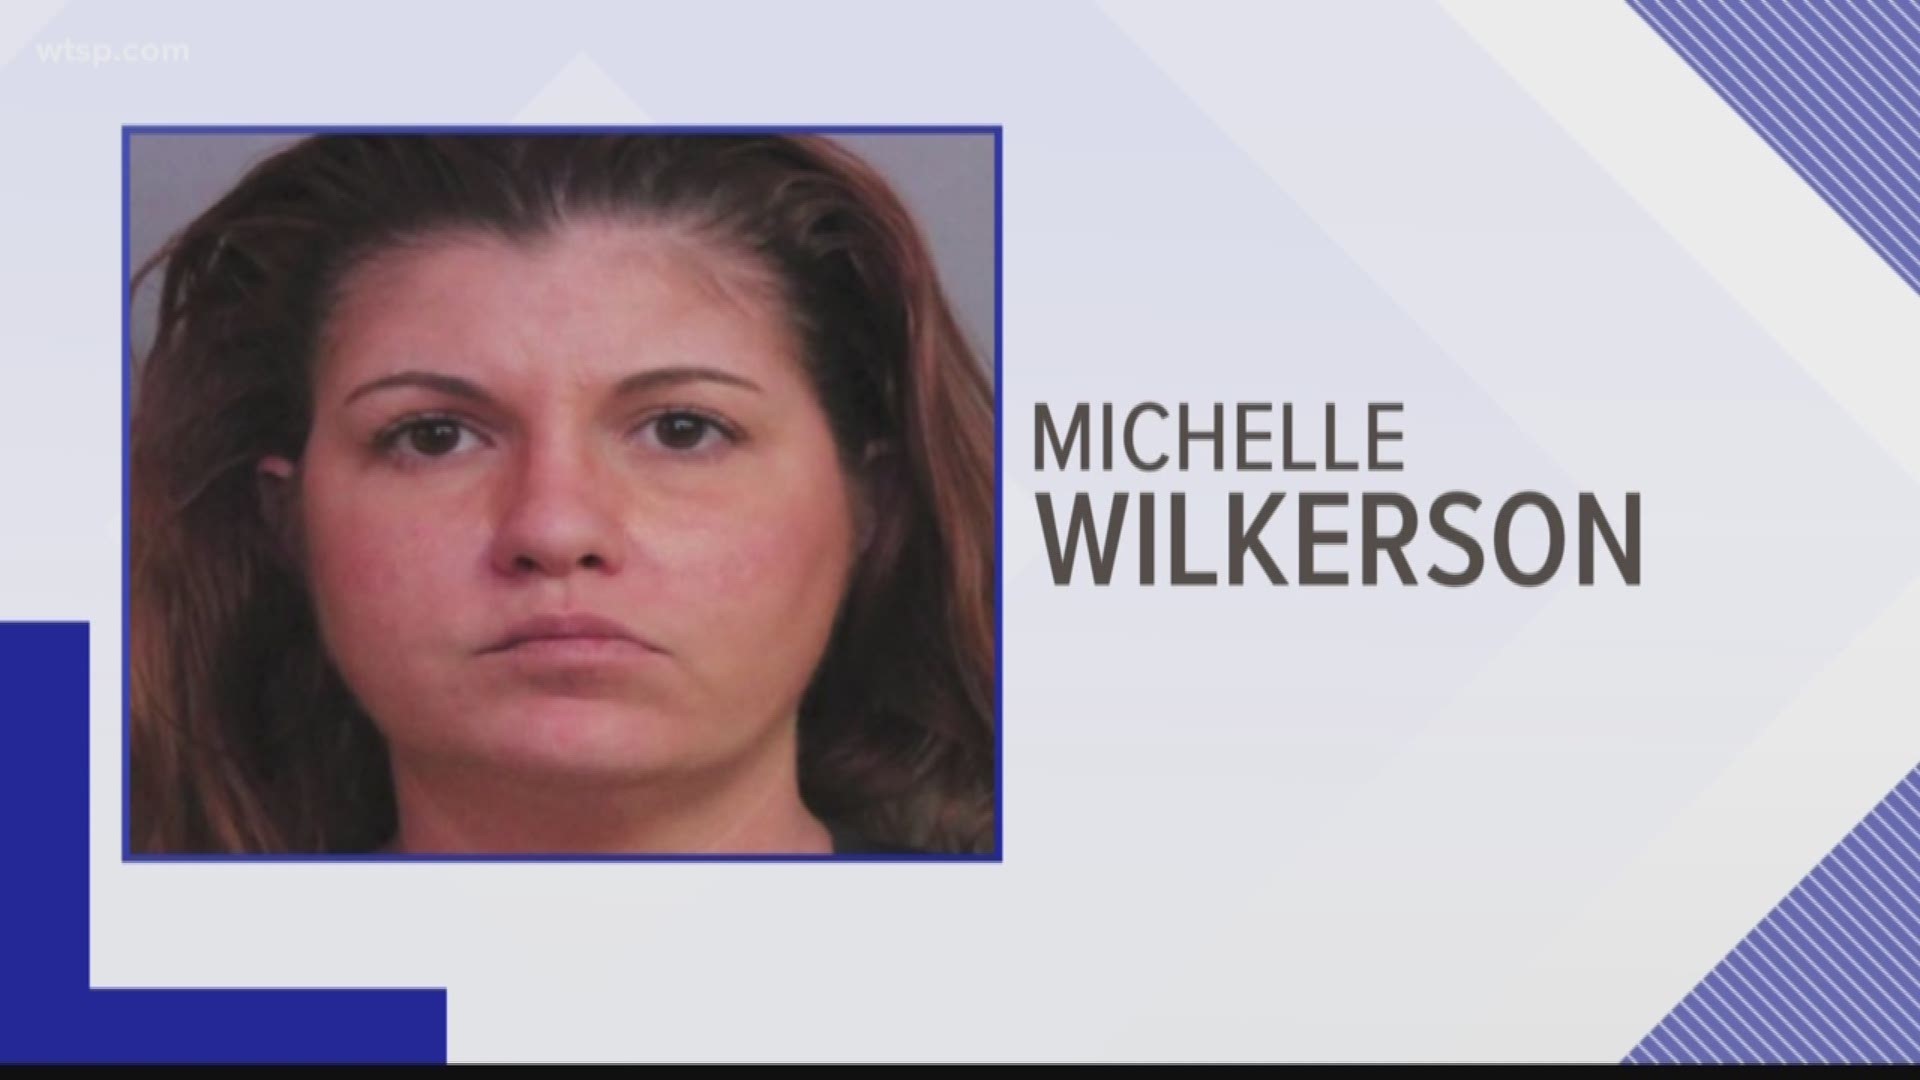 A worker at an Auburndale daycare center is accused of abusing the children she was supposed to be caring for, police said.

The investigation began July 31 after police learned of allegations of abuse at Little Bloodhound Preschool. https://on.wtsp.com/2OSRGVr